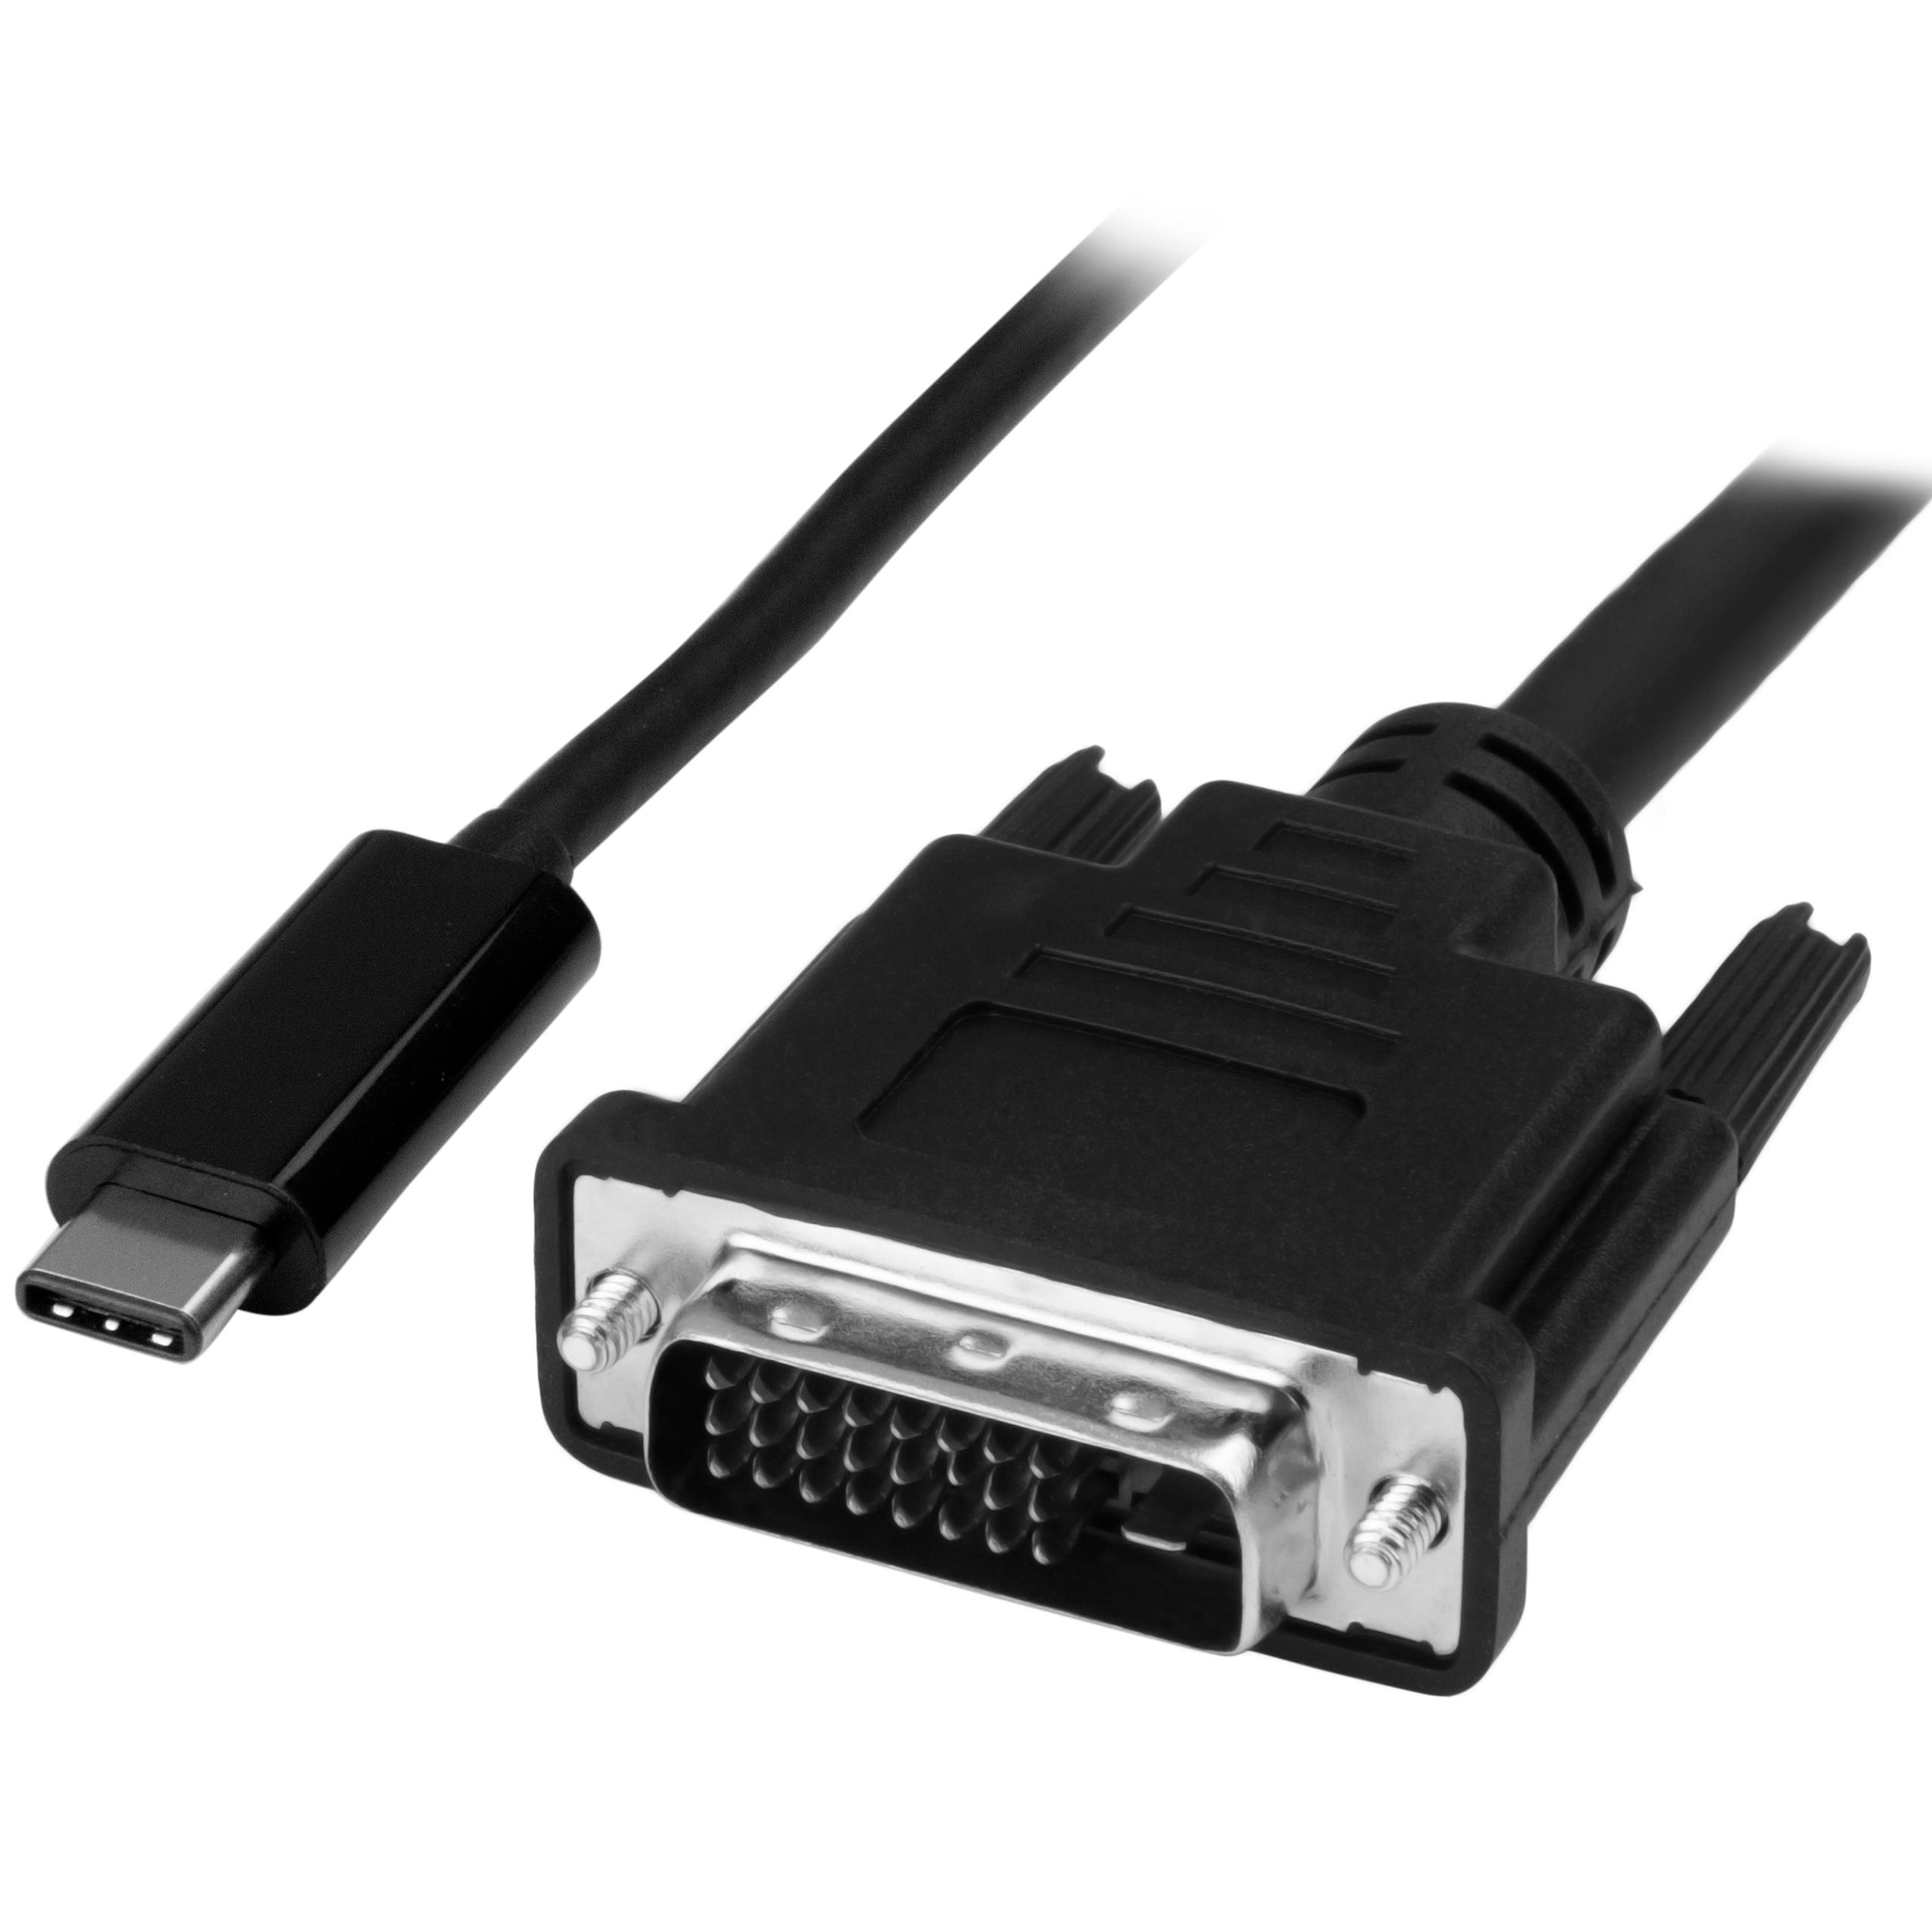 Monitor cable connectors